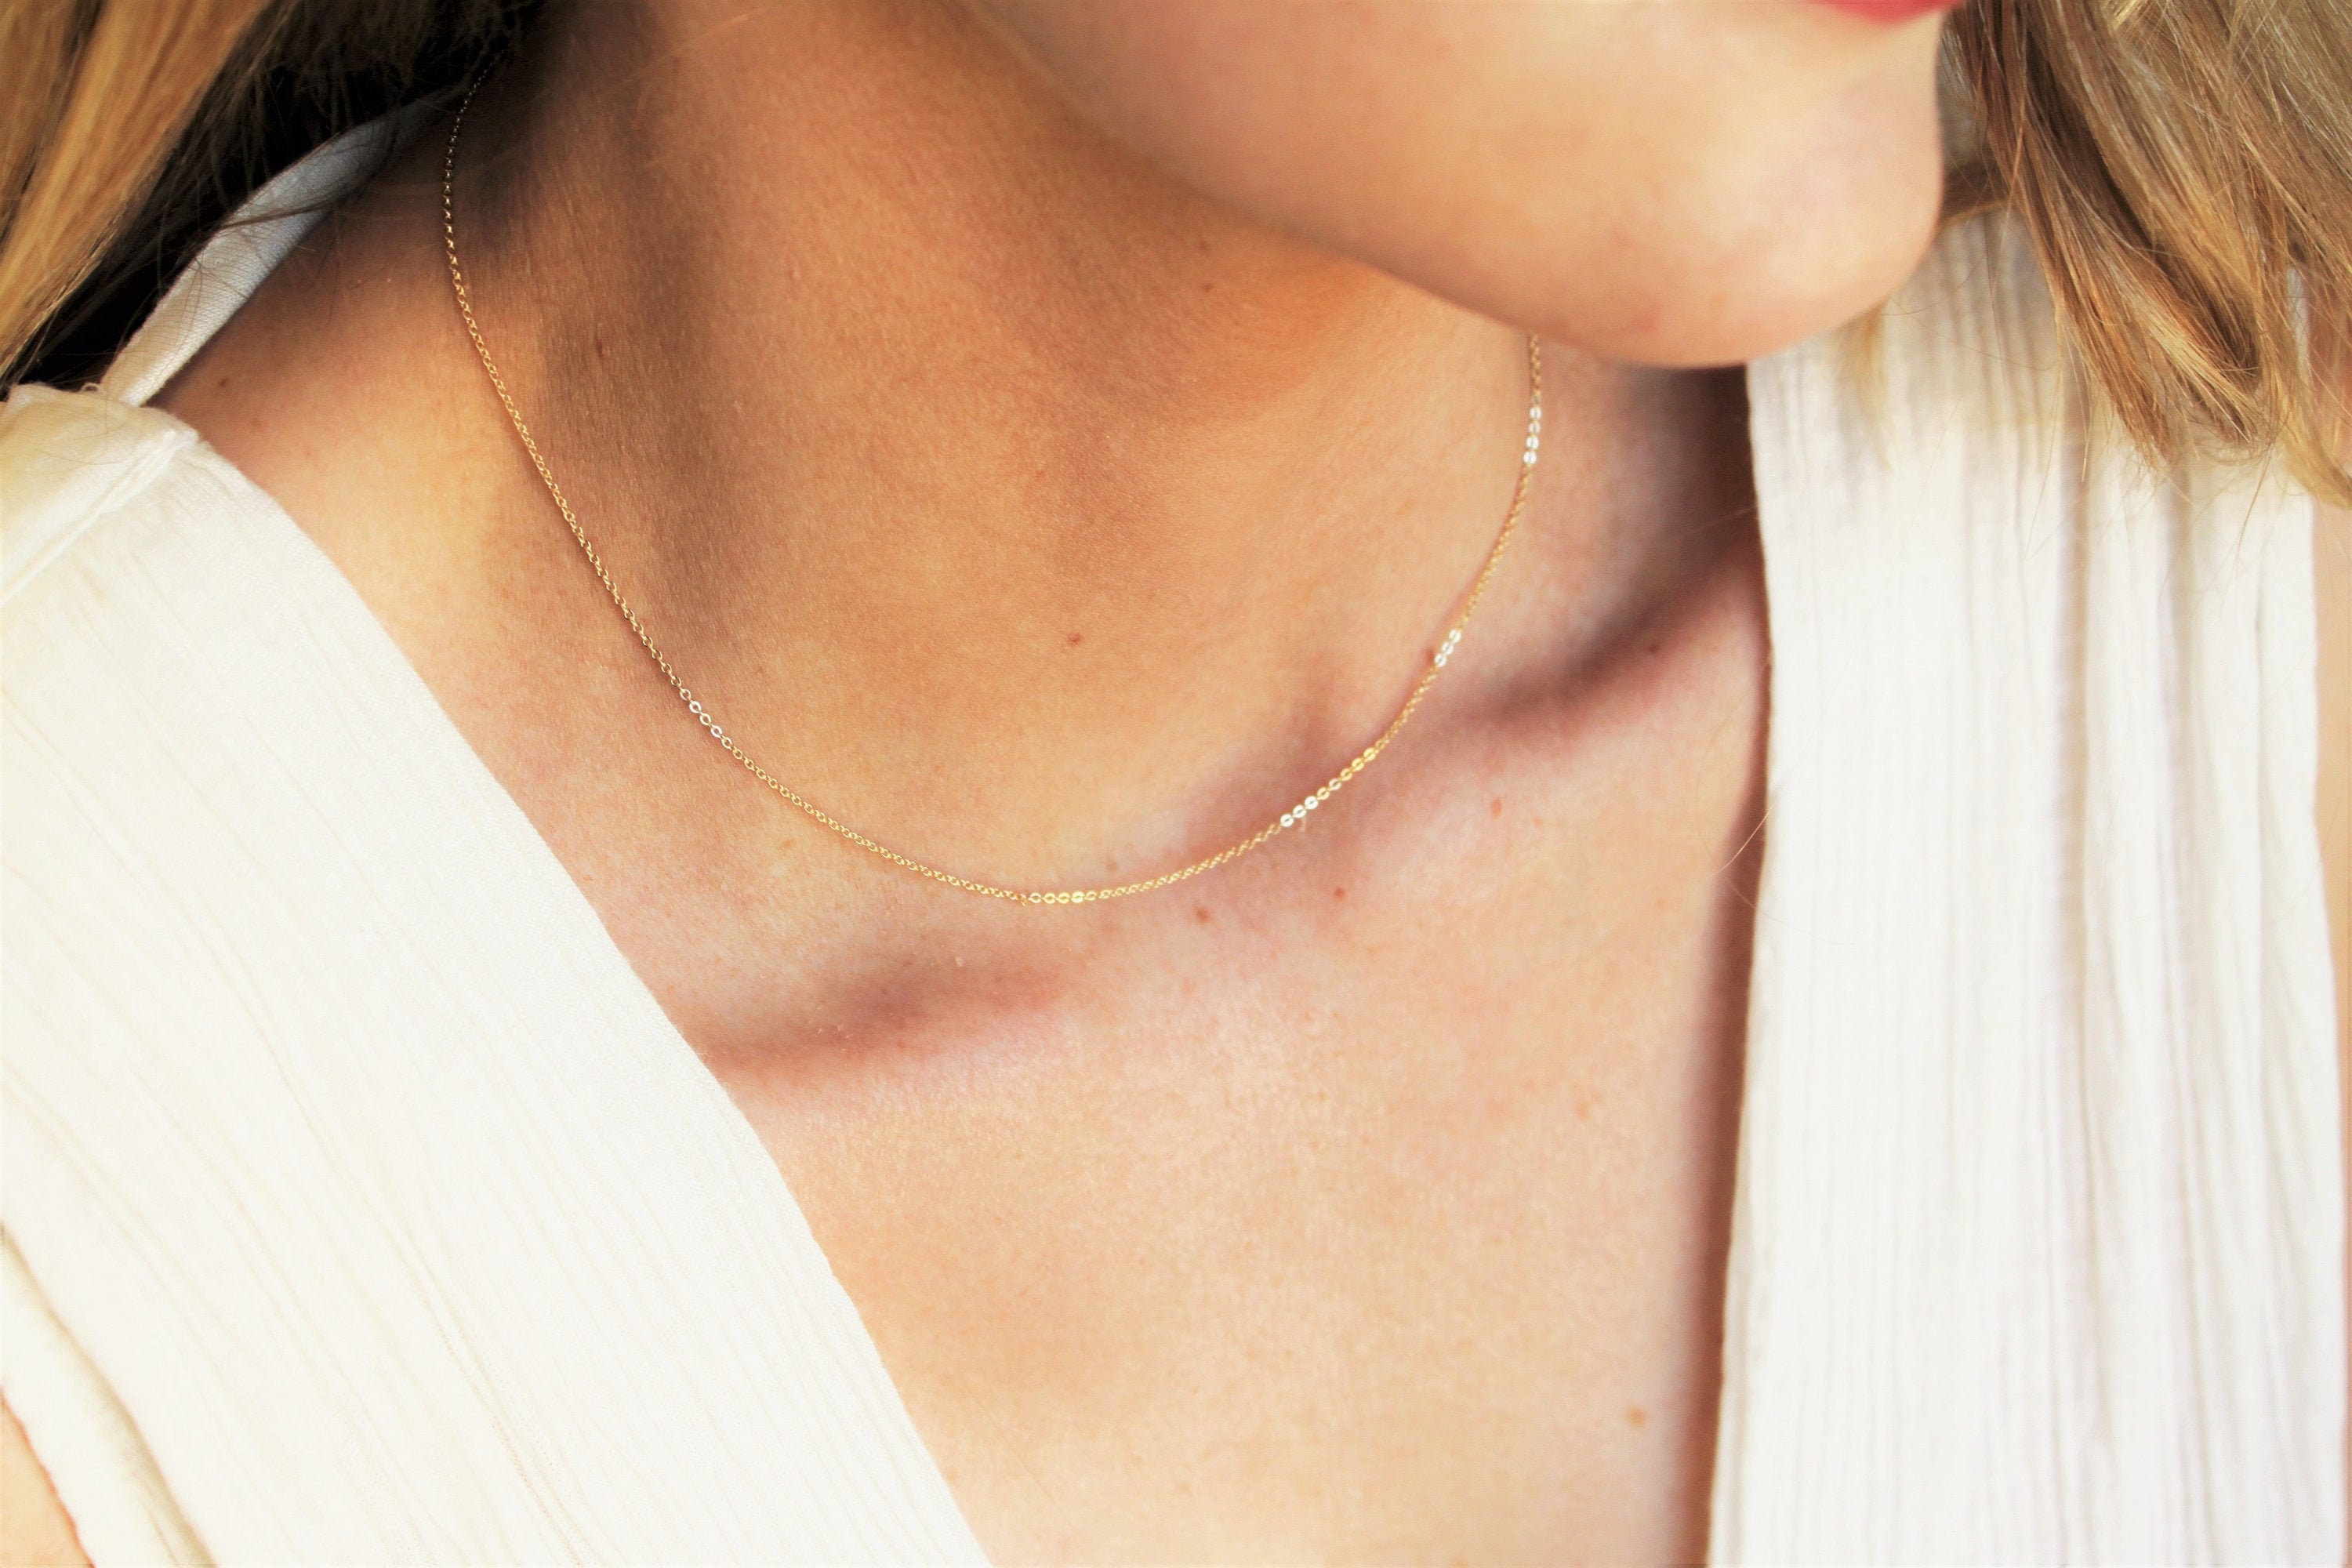 Minimalist Chain Necklace Gold, Silver, or Rose Gold Basic Gold Chain  Necklace Dainty Necklace Layering Thin Chain Necklace 